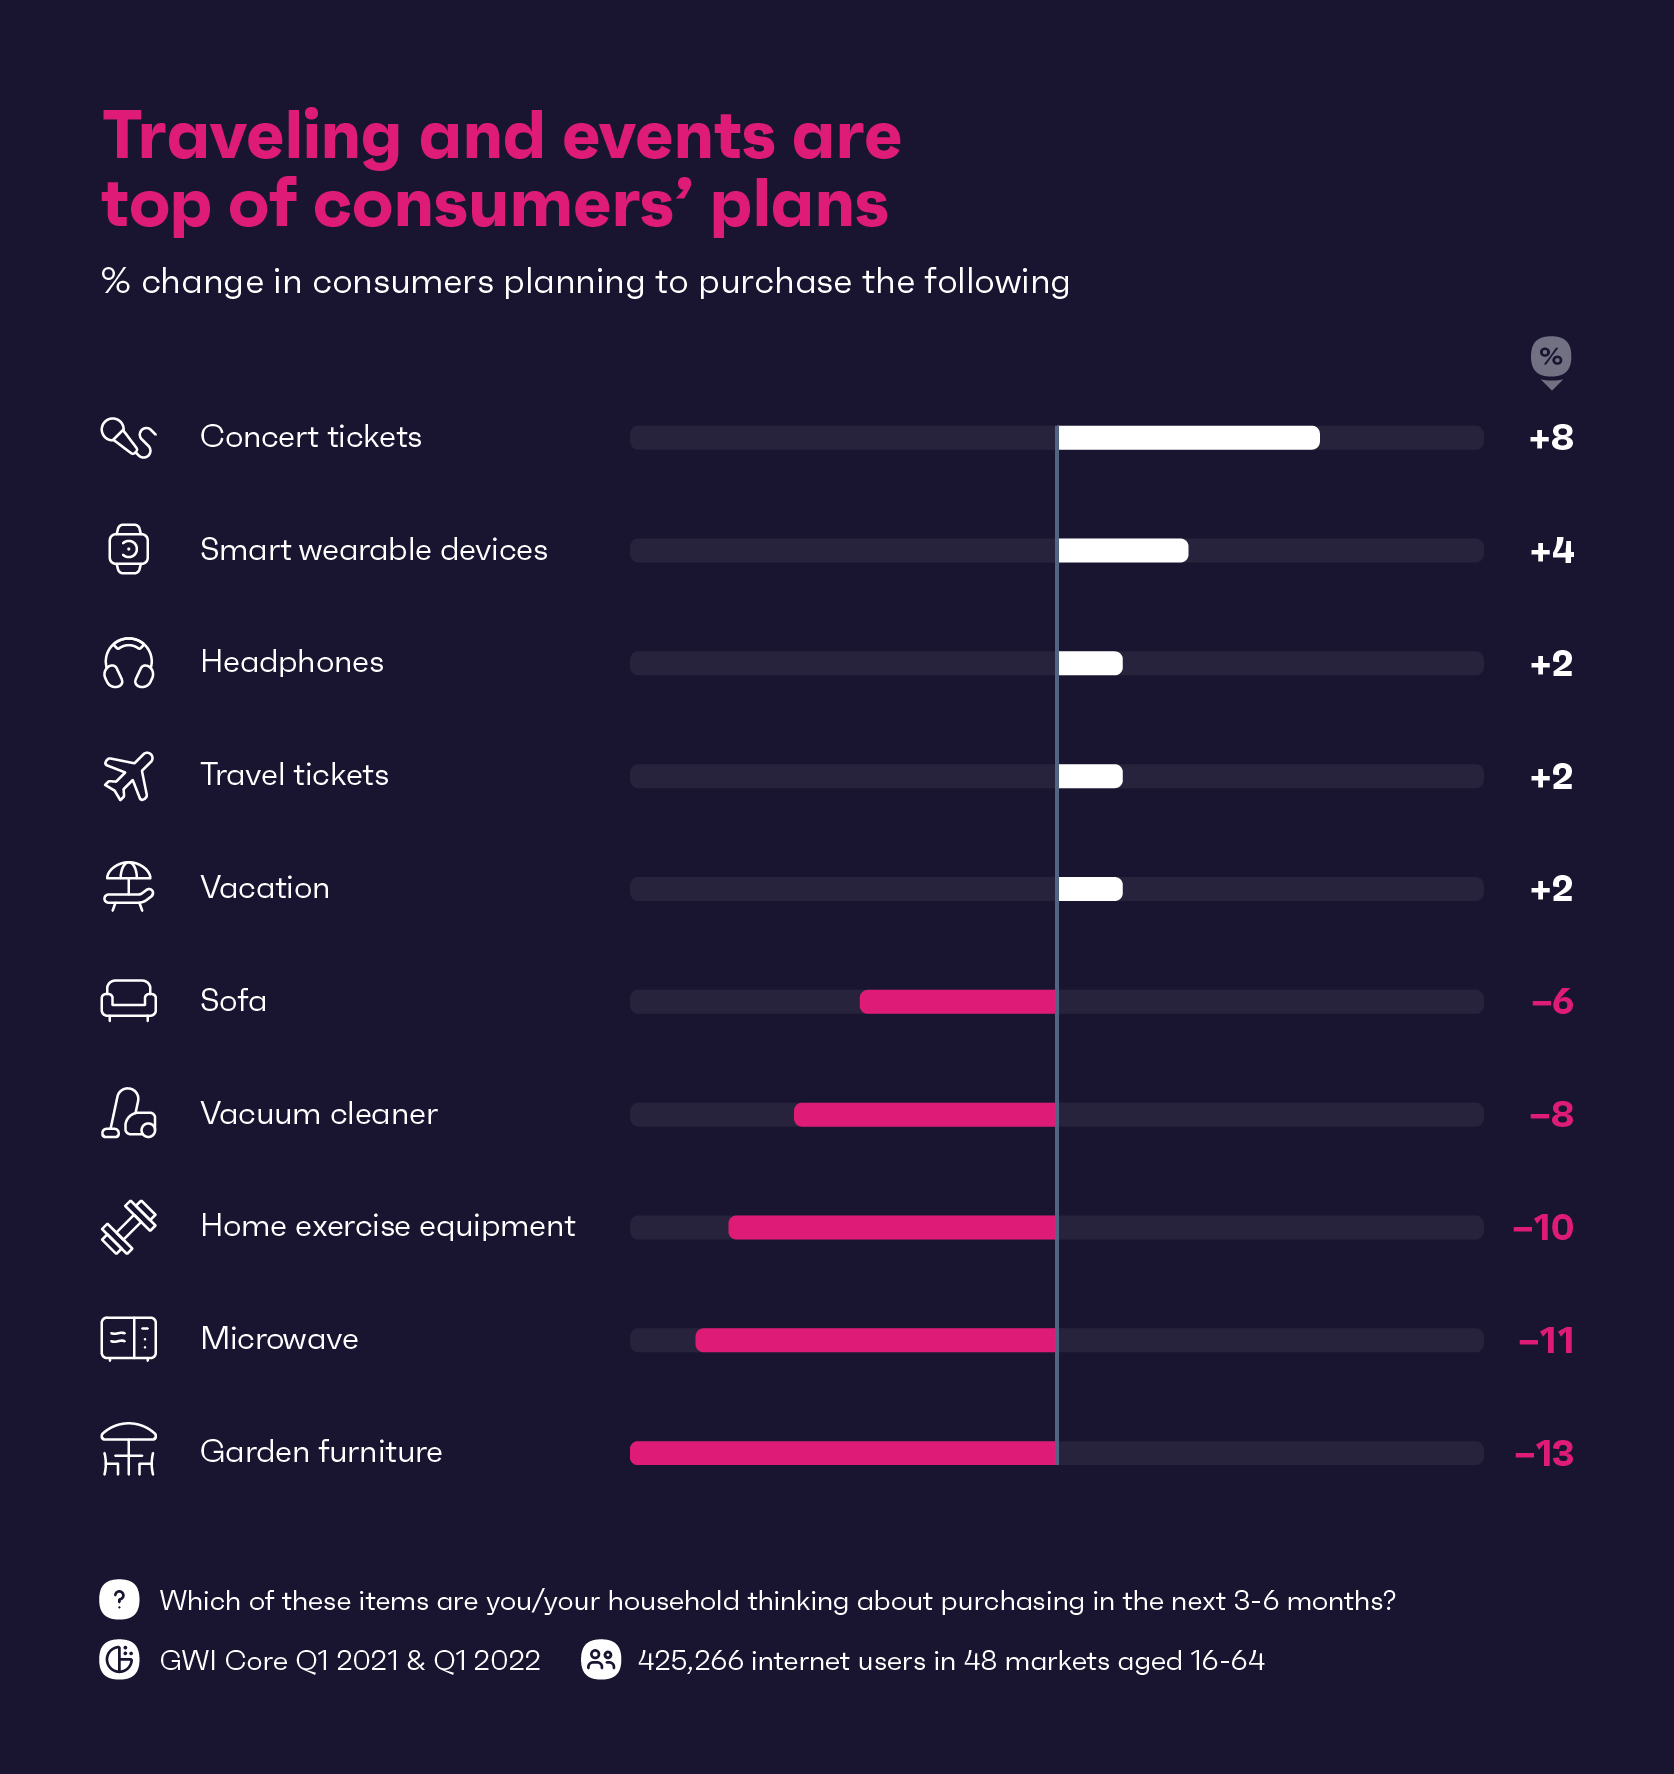 Traveling and events are top of consumers' plans